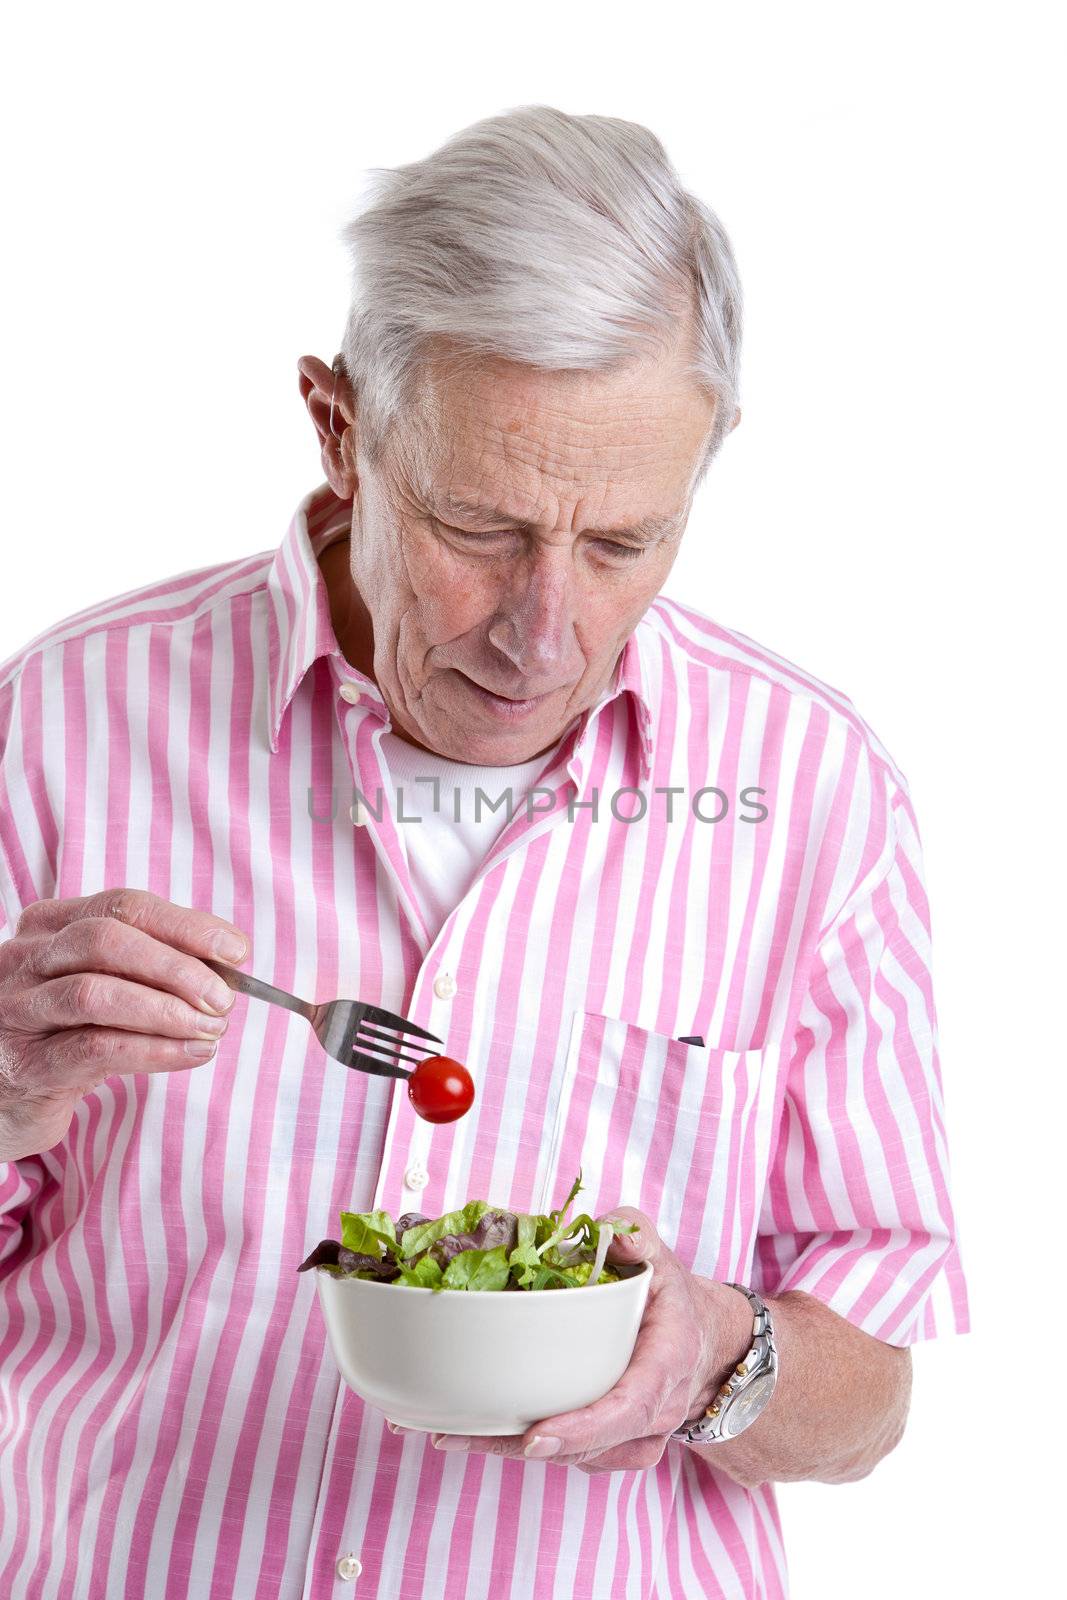 Eating a healthy salad by Fotosmurf